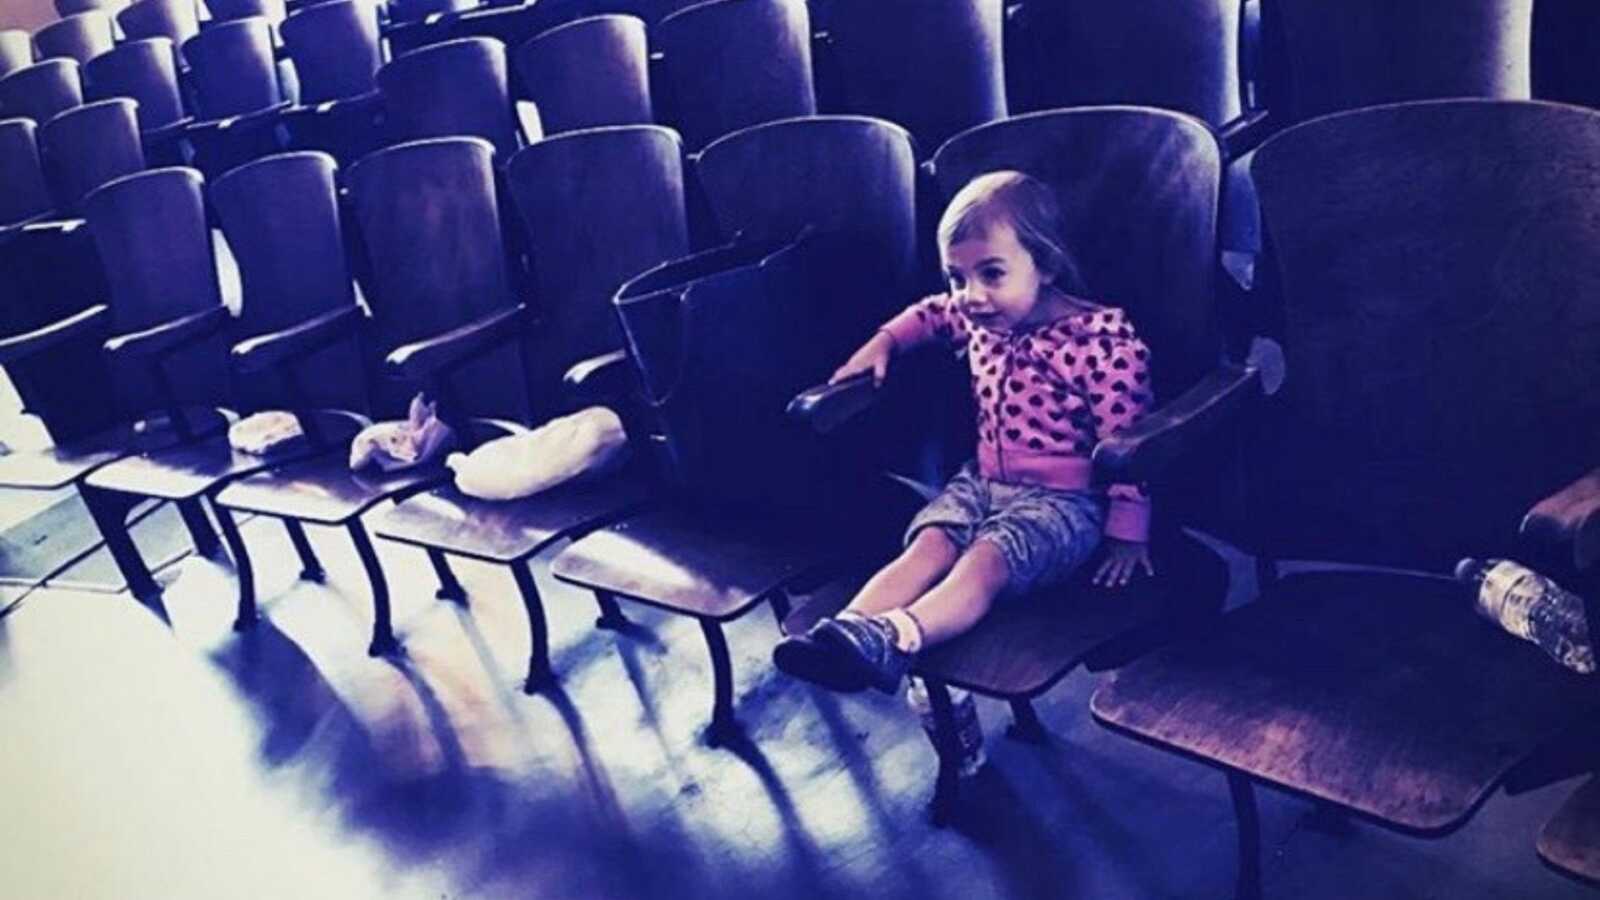 toddler sits in front row theater seat